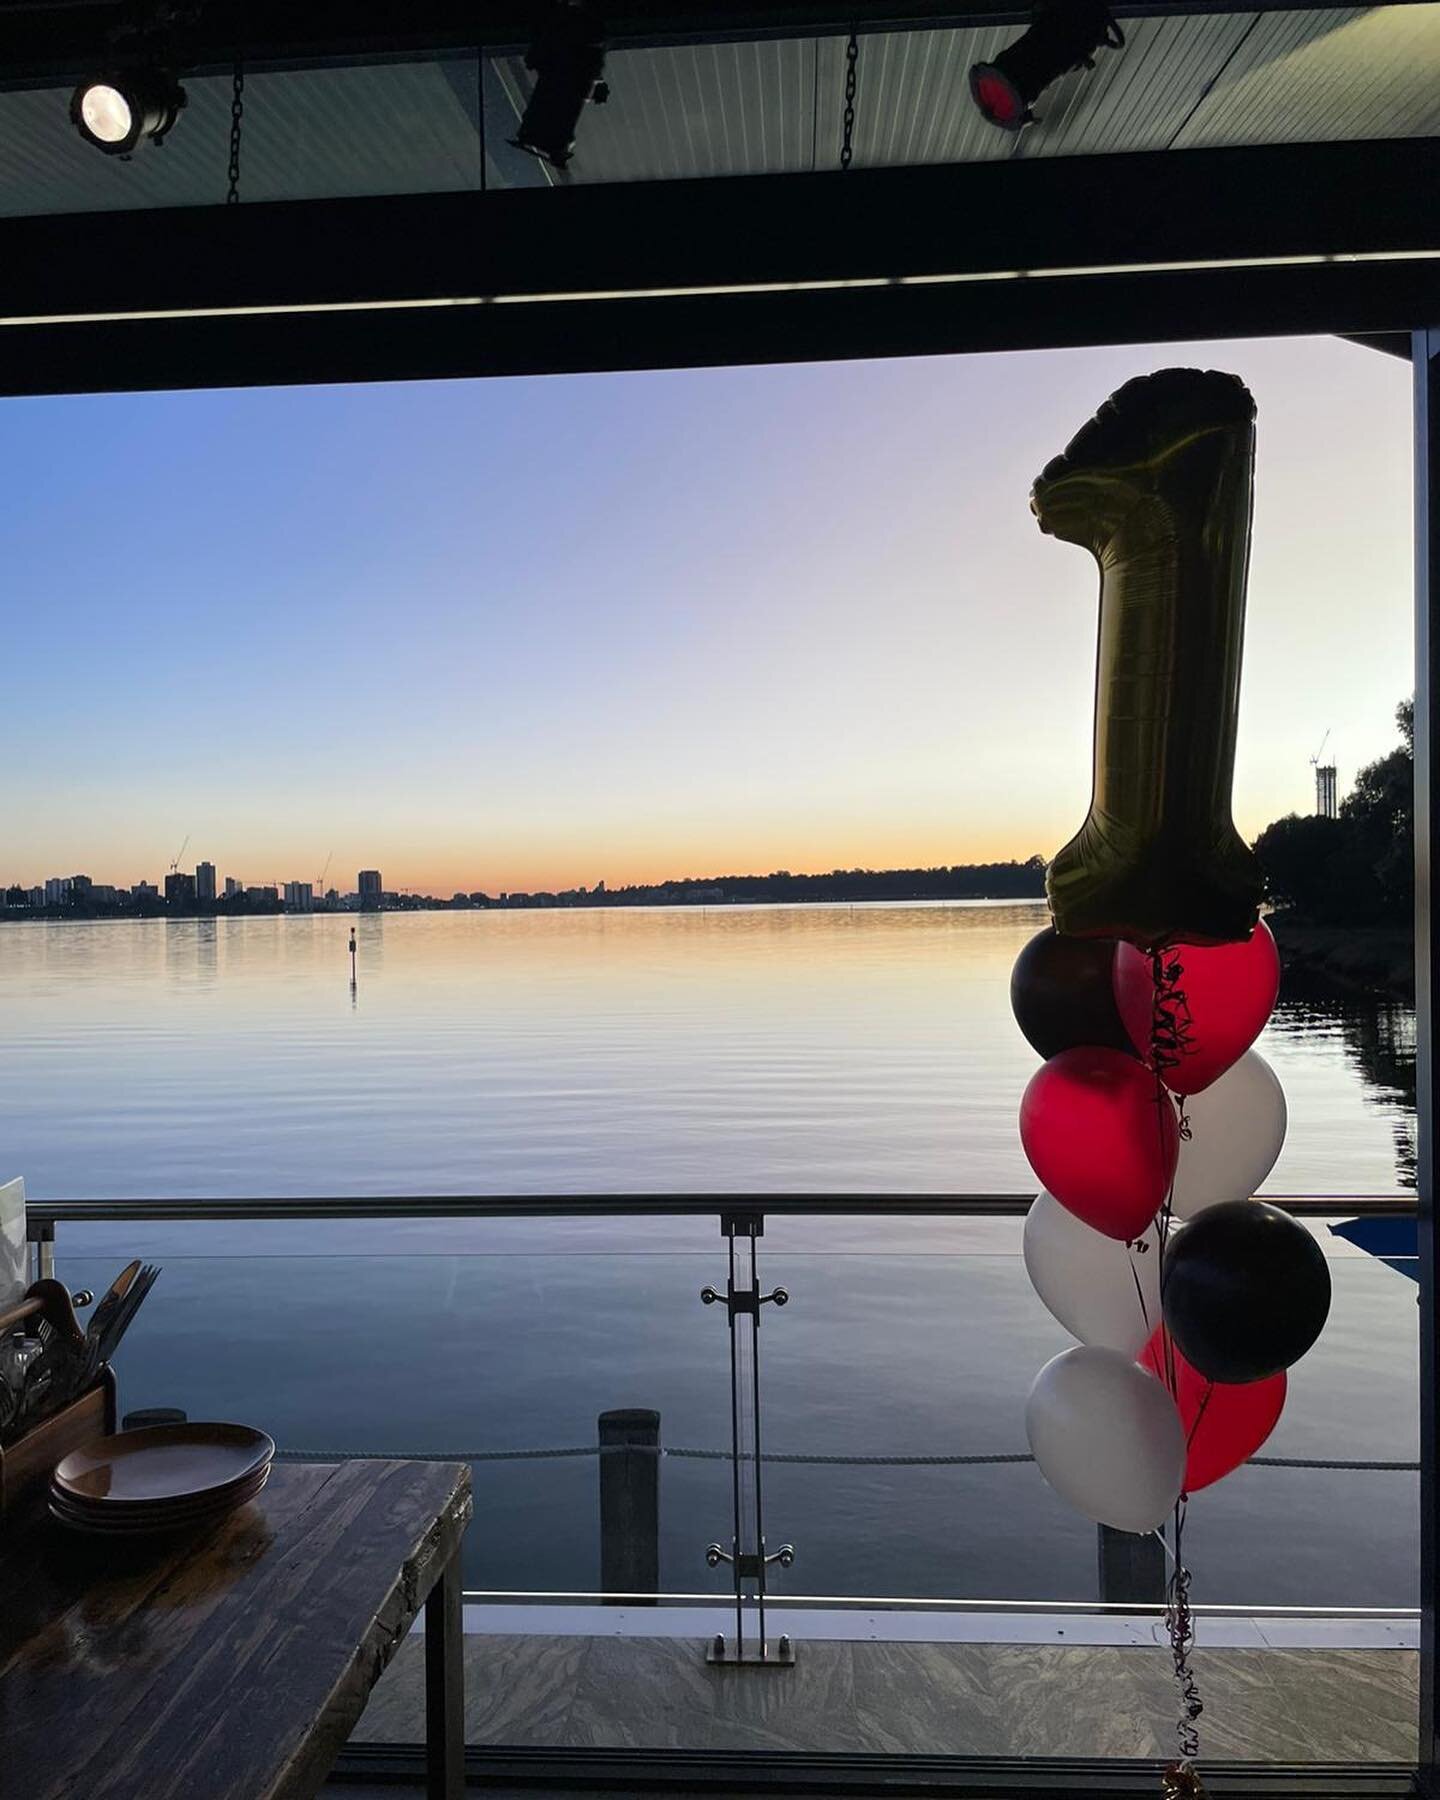 About last night&hellip;.

Thanks to all the incredible people that joined us for our first birthday!
.
.
.
#perthpub #perthbrewery #longneckbrewery #cityofperth #perthsunset #perthbeersnobs #cheers #perthbeers #swanriver #justanotherdayinwa #westisb